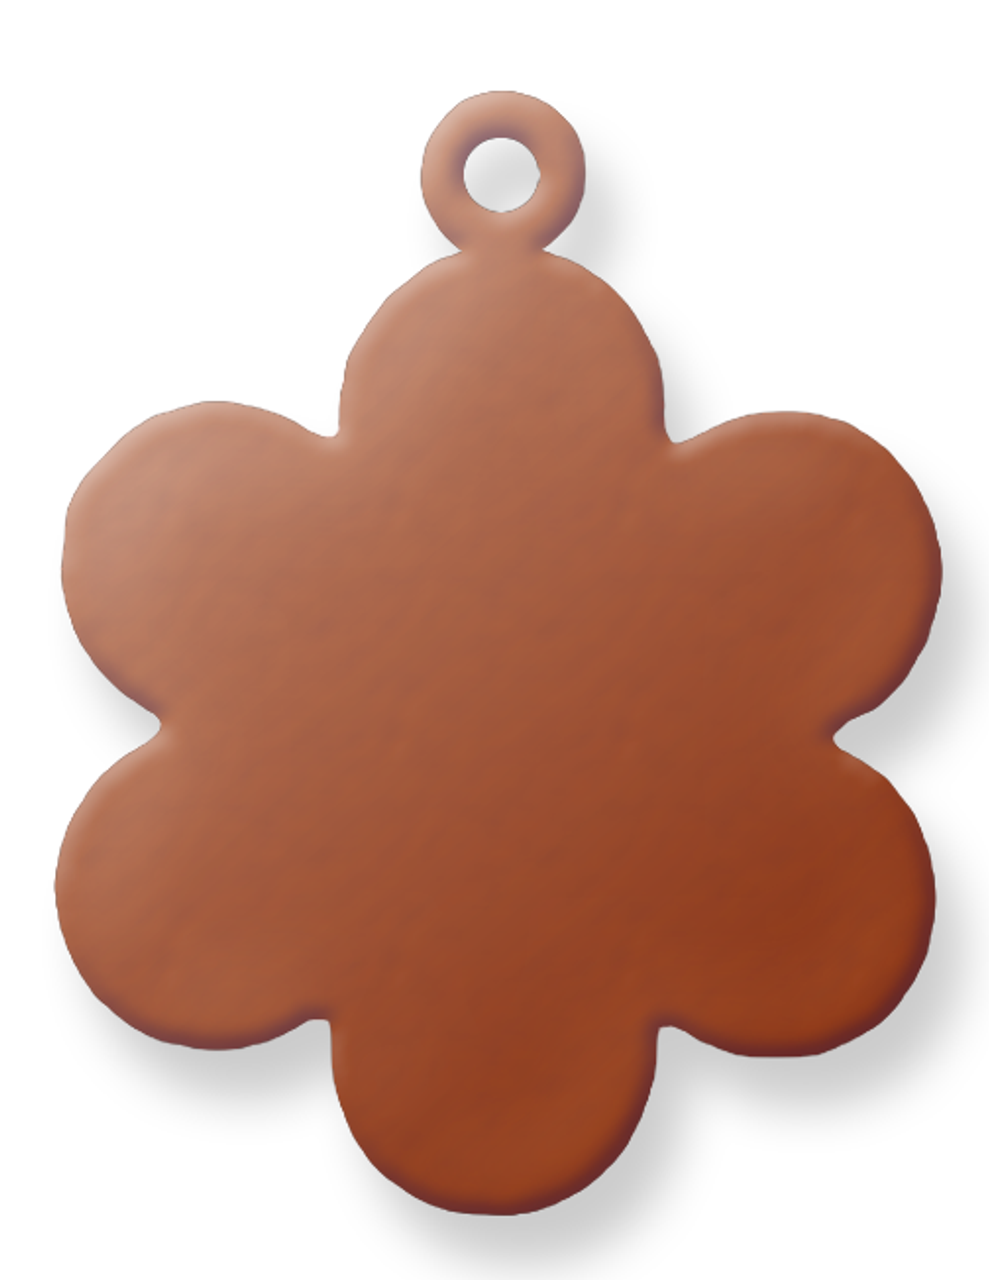 Copper Blank Daisy Stamped Shape for Enamelling & Other Crafts